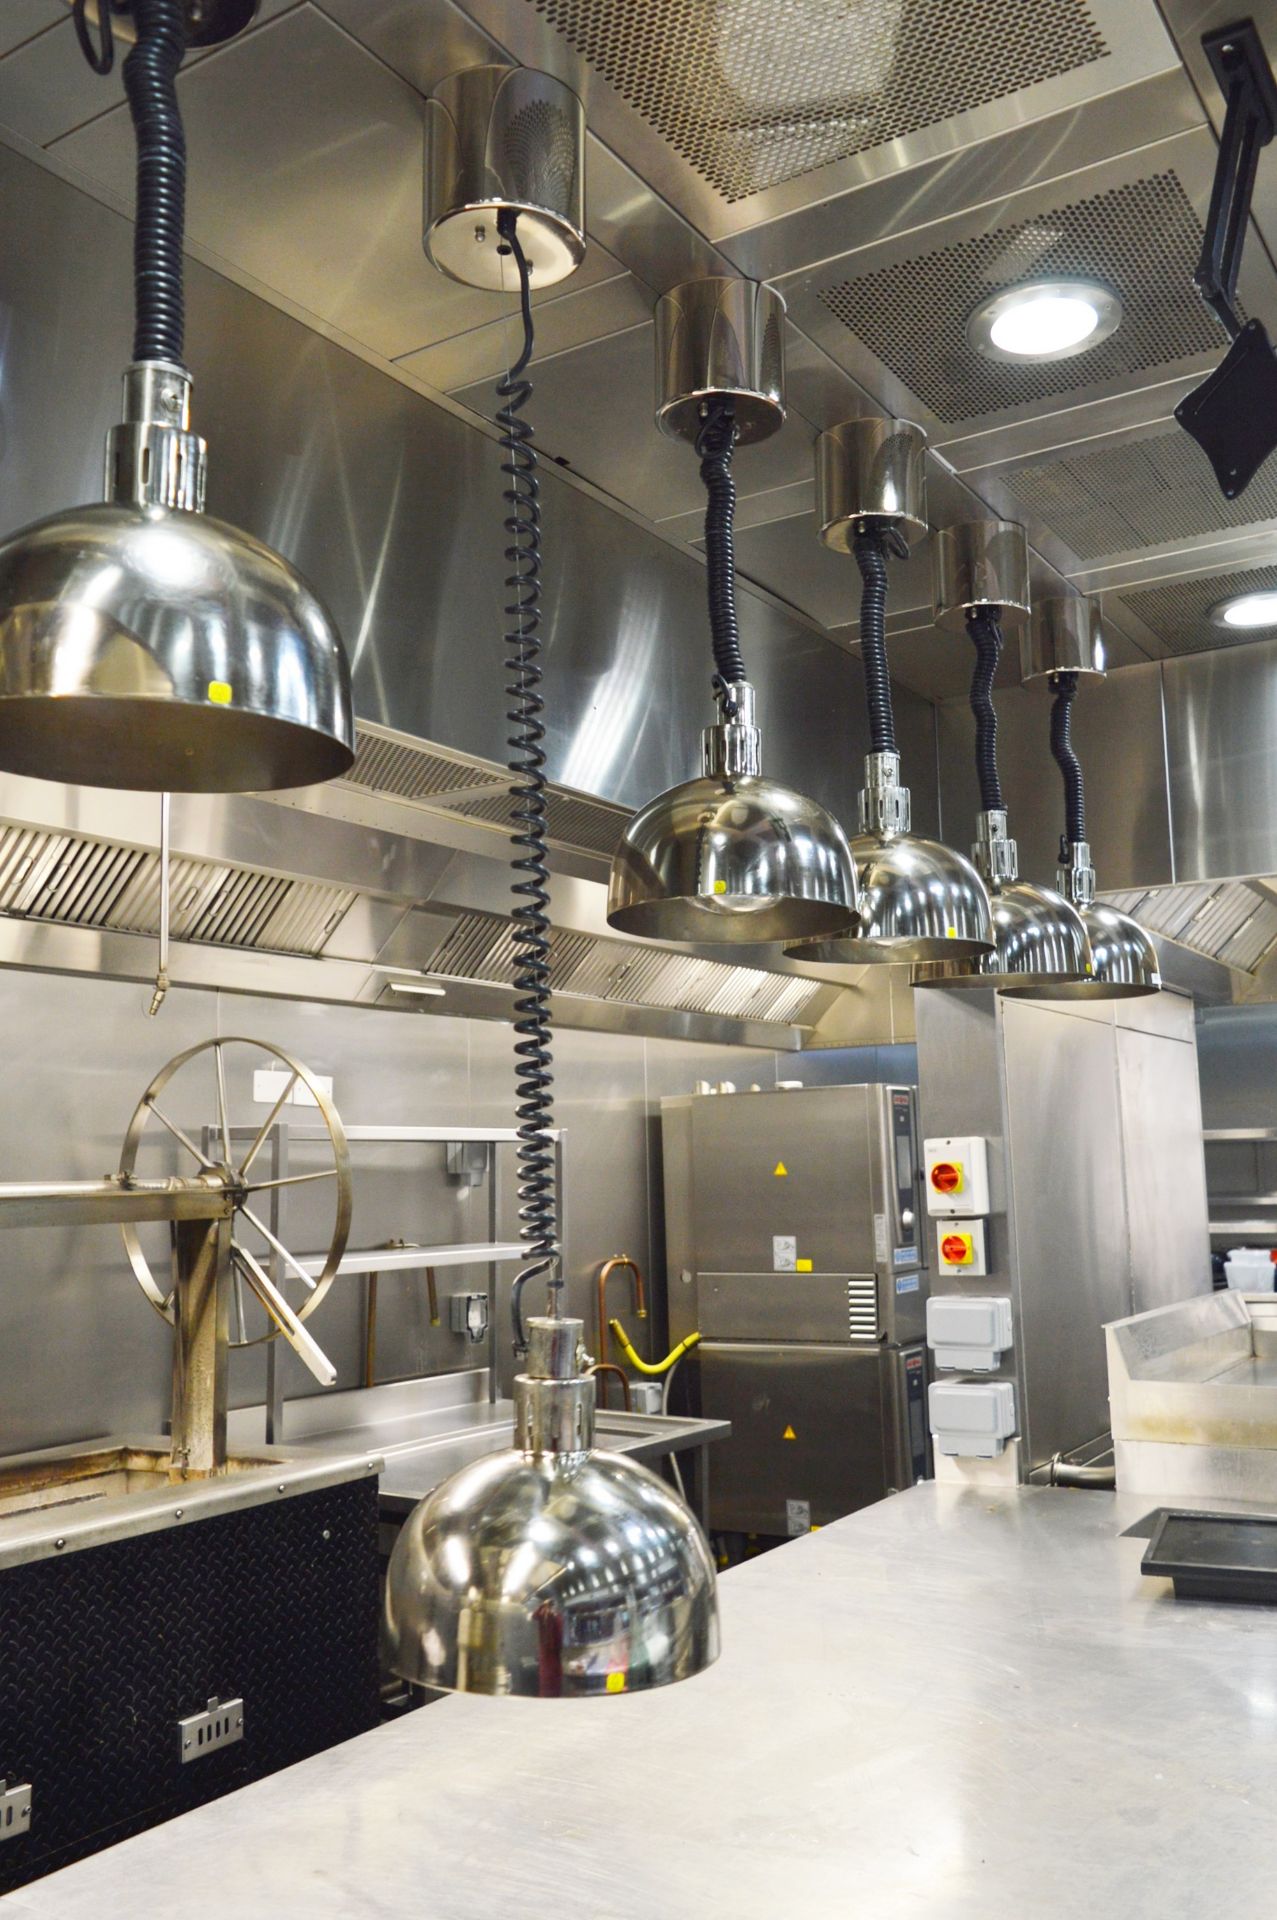 4 x Hatco DL-750-RL Hanging Retractable Heat Lamps in Bright Chrome - Keeps Food Warm at Kitchen - Image 3 of 7